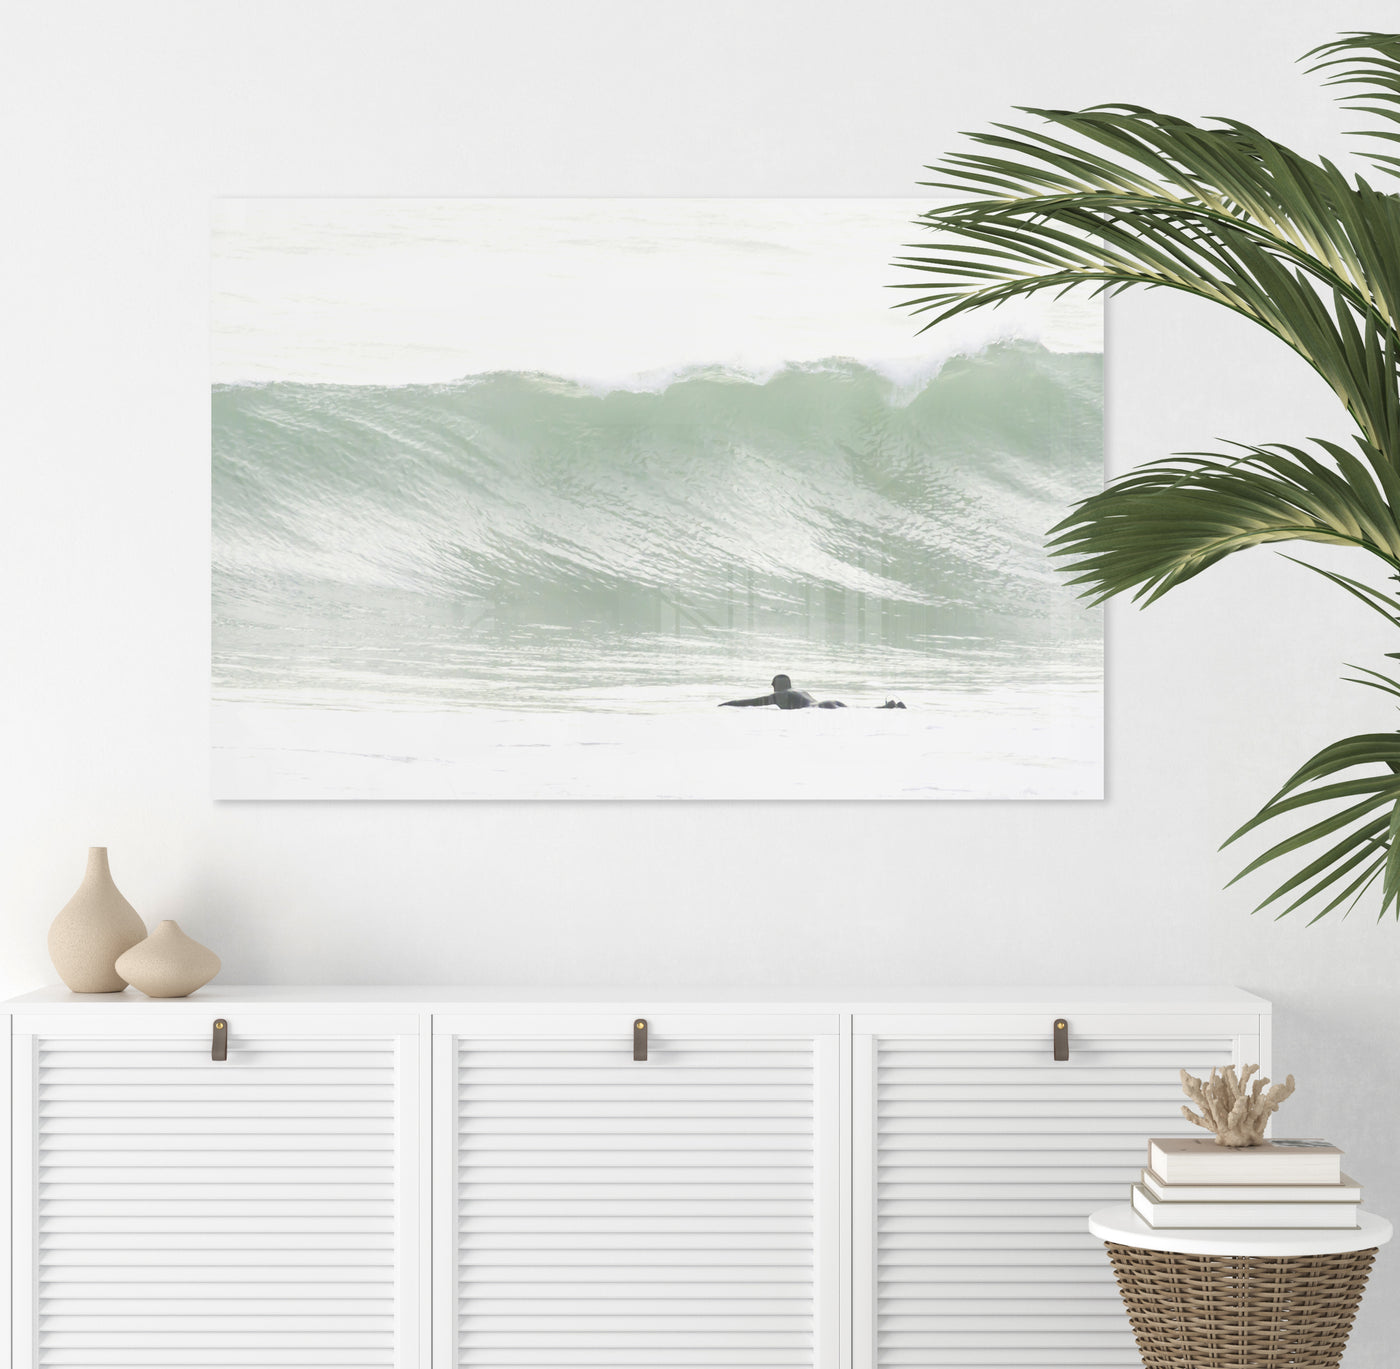 Surfing No 4 - Acrylic glass print by Cattie Coyle Photography above dresser